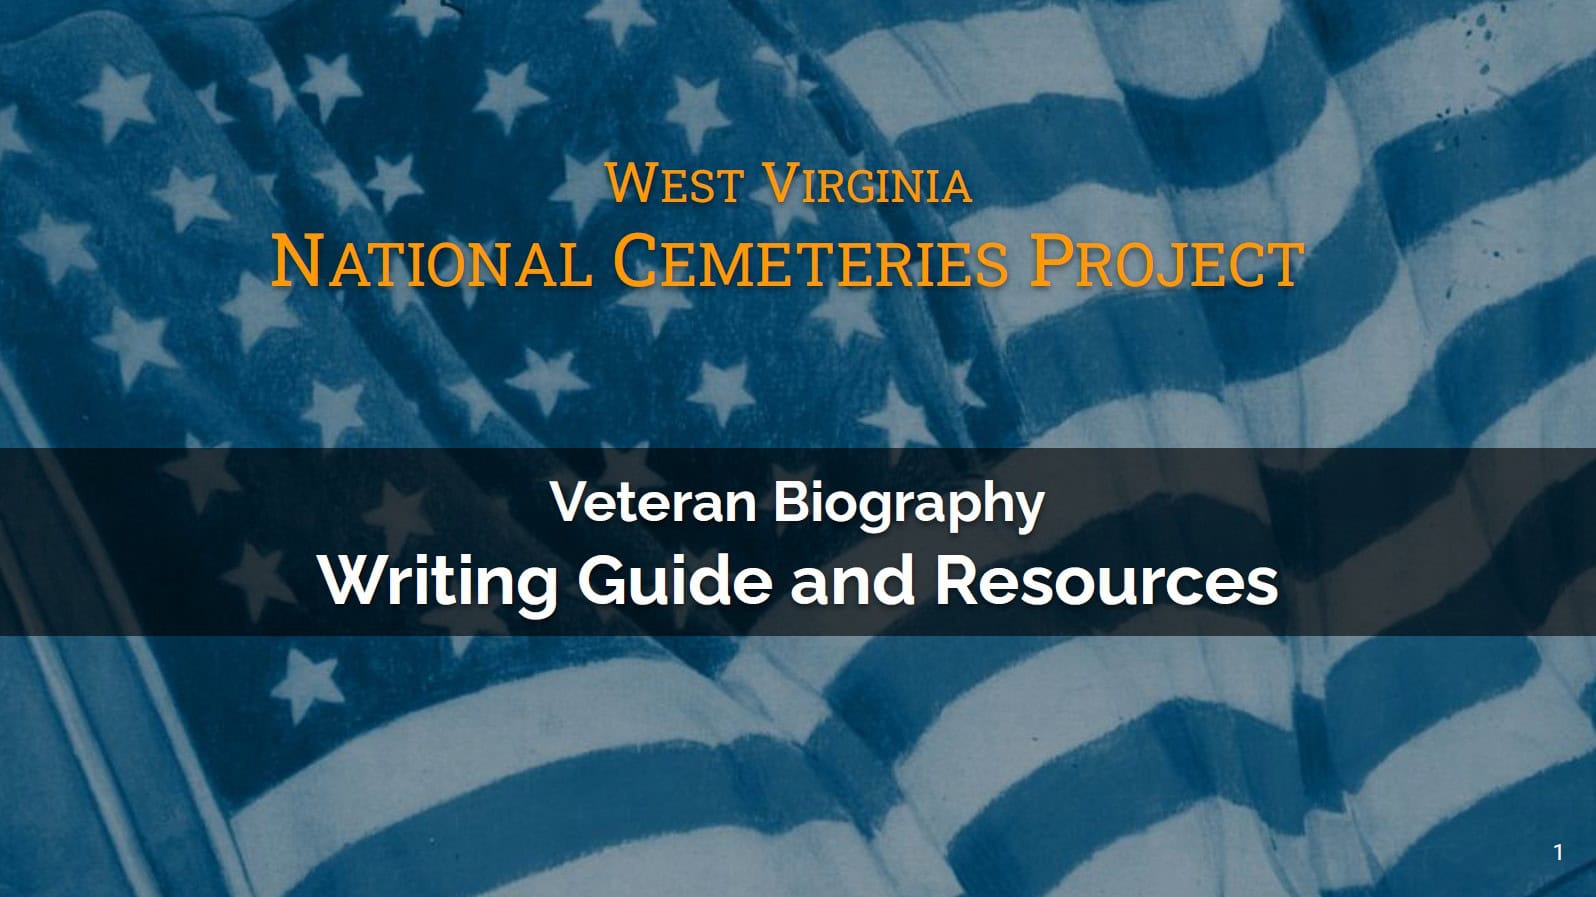 West Virginia National Cemeteries Project: Veteran Biography Writing Guide and Resources